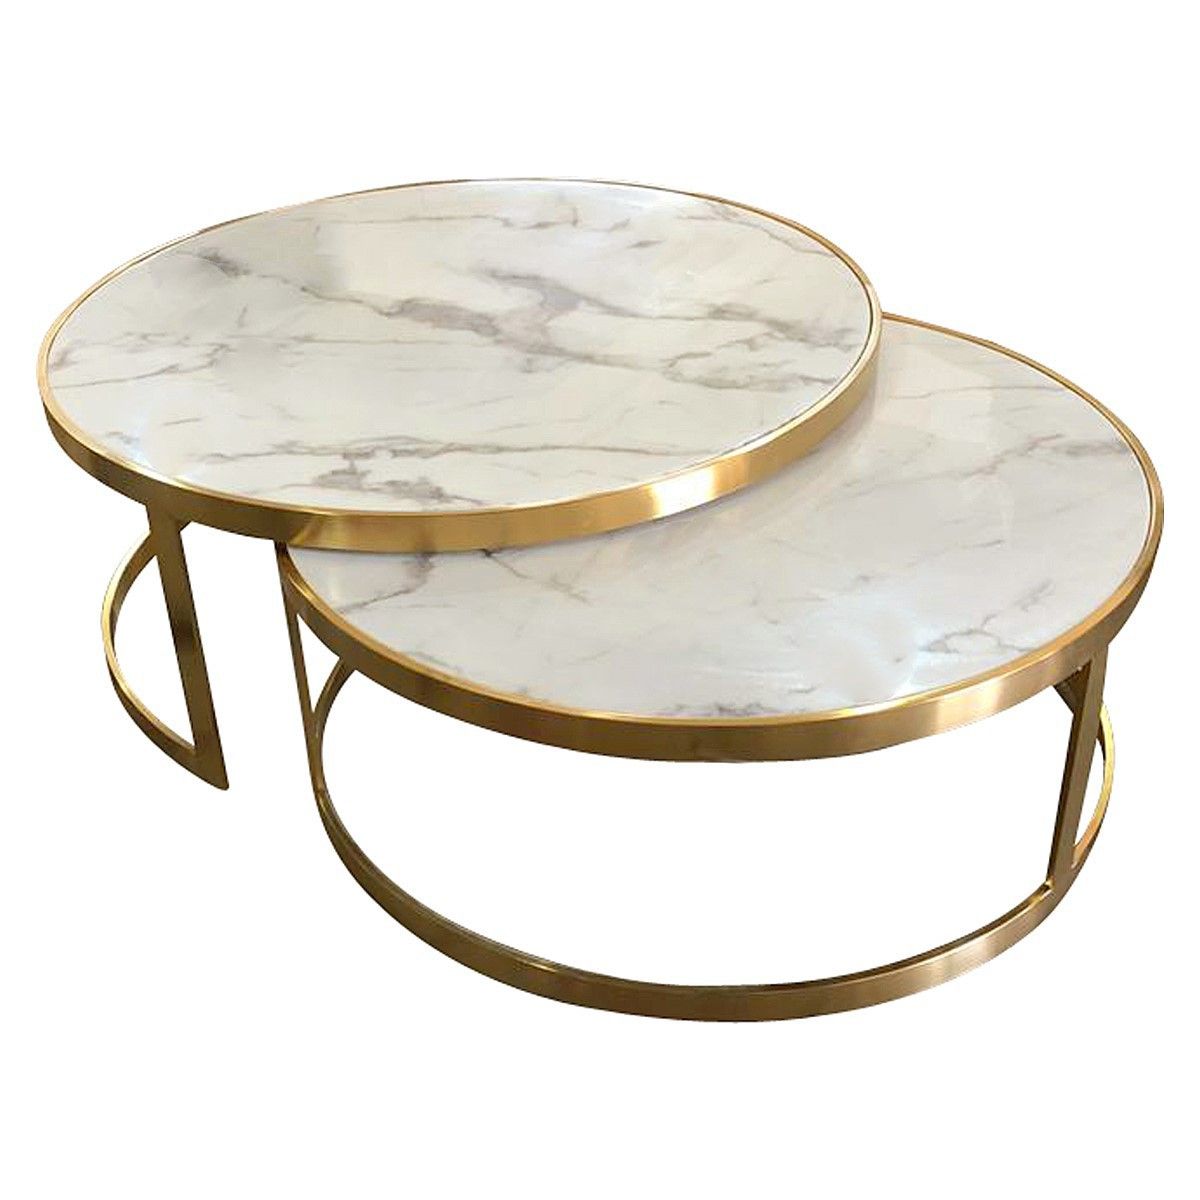 Mirabello 2 Piece Faux Marble Topped Metal Round Nesting Regarding Faux Marble Coffee Tables (View 15 of 15)